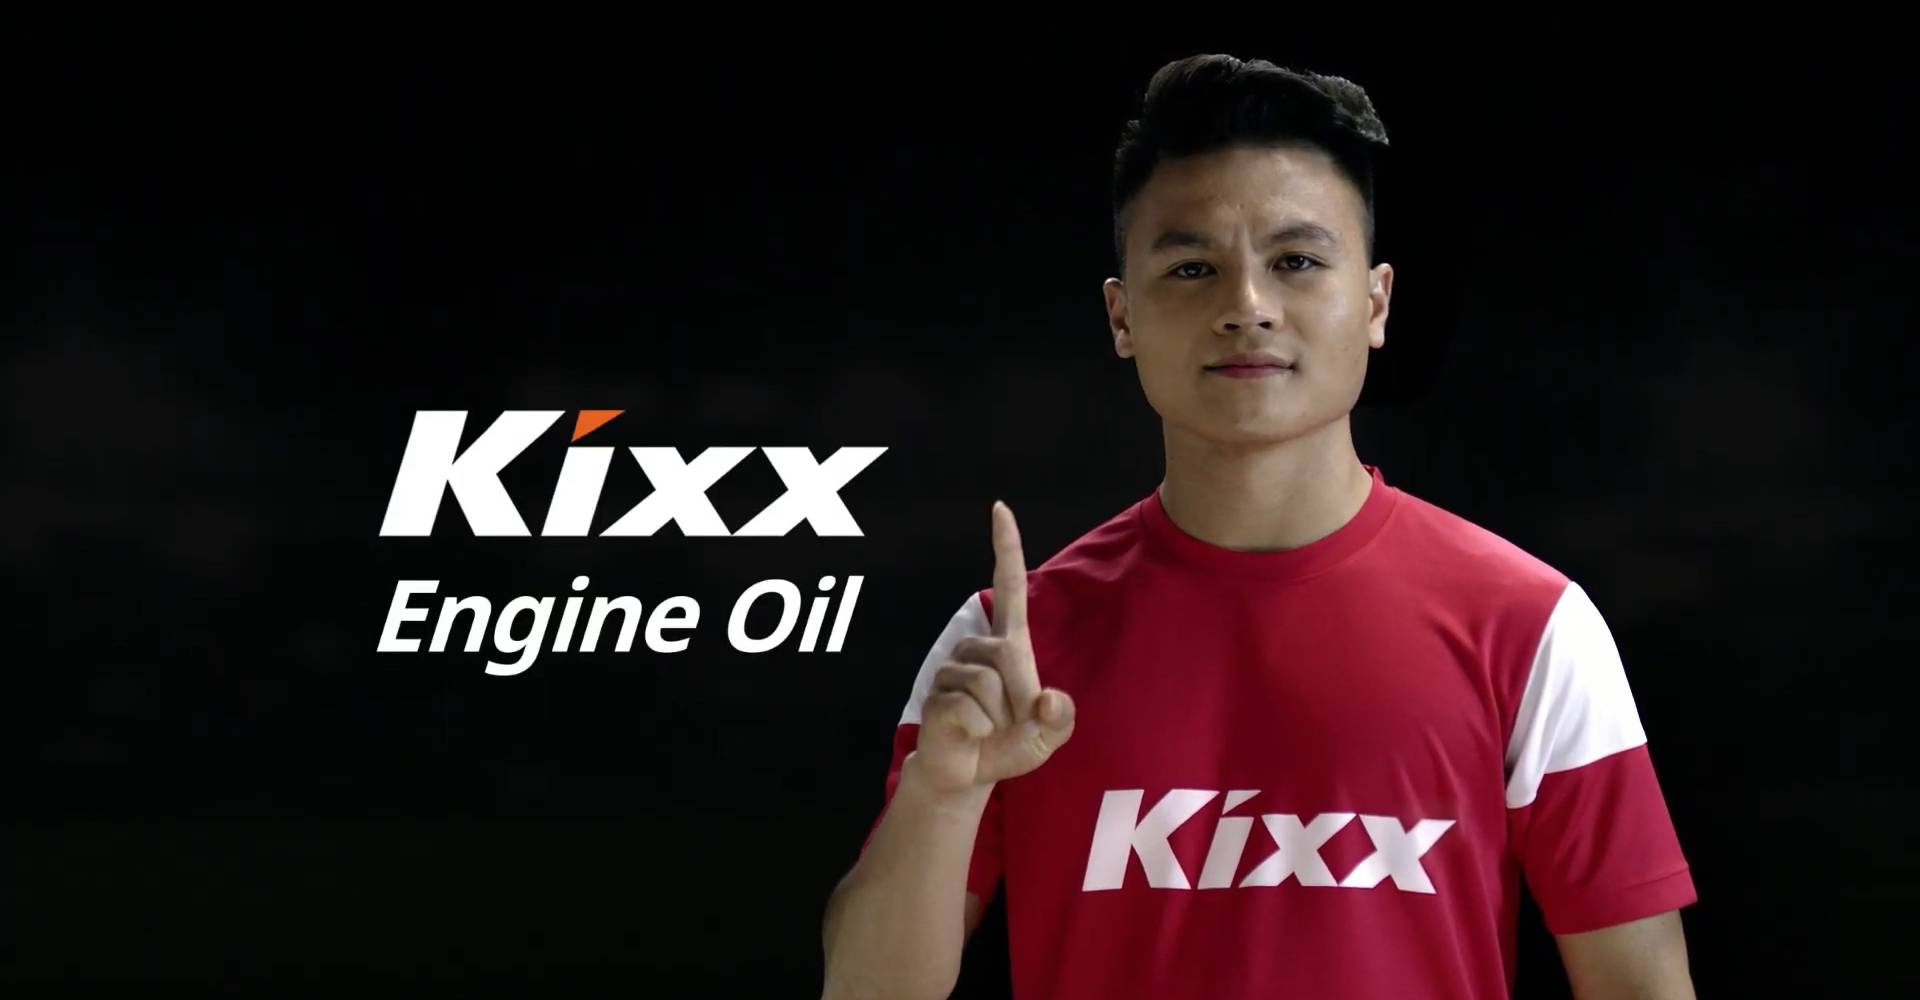 Kixx Launches New TV Commercial in Vietnam Starring Quang Hai